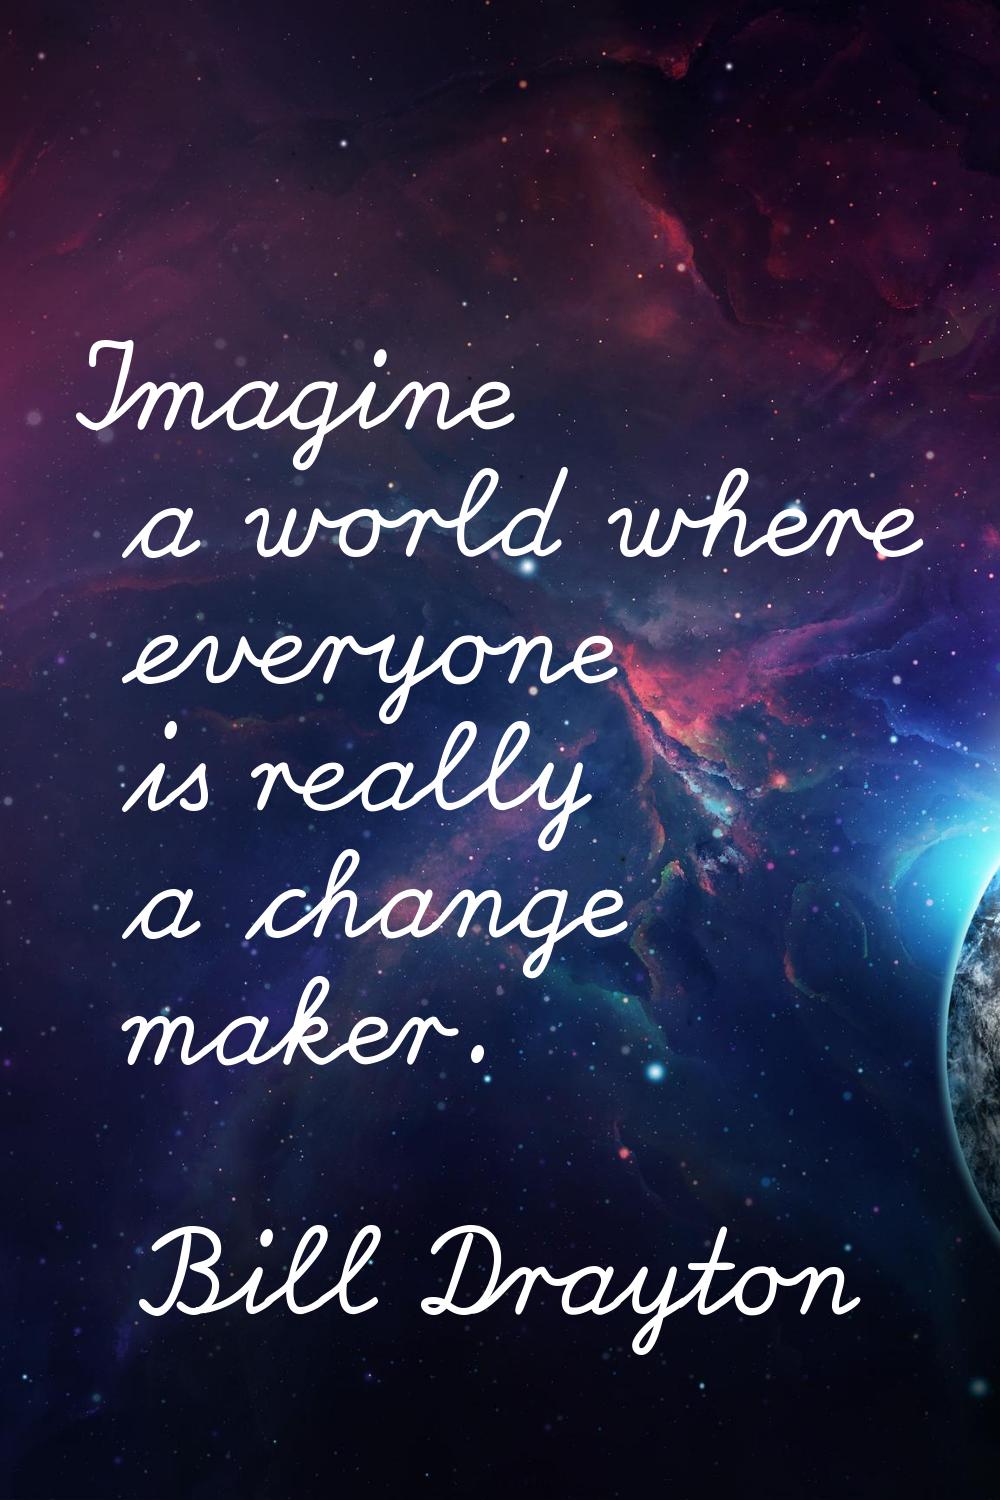 Imagine a world where everyone is really a change maker.